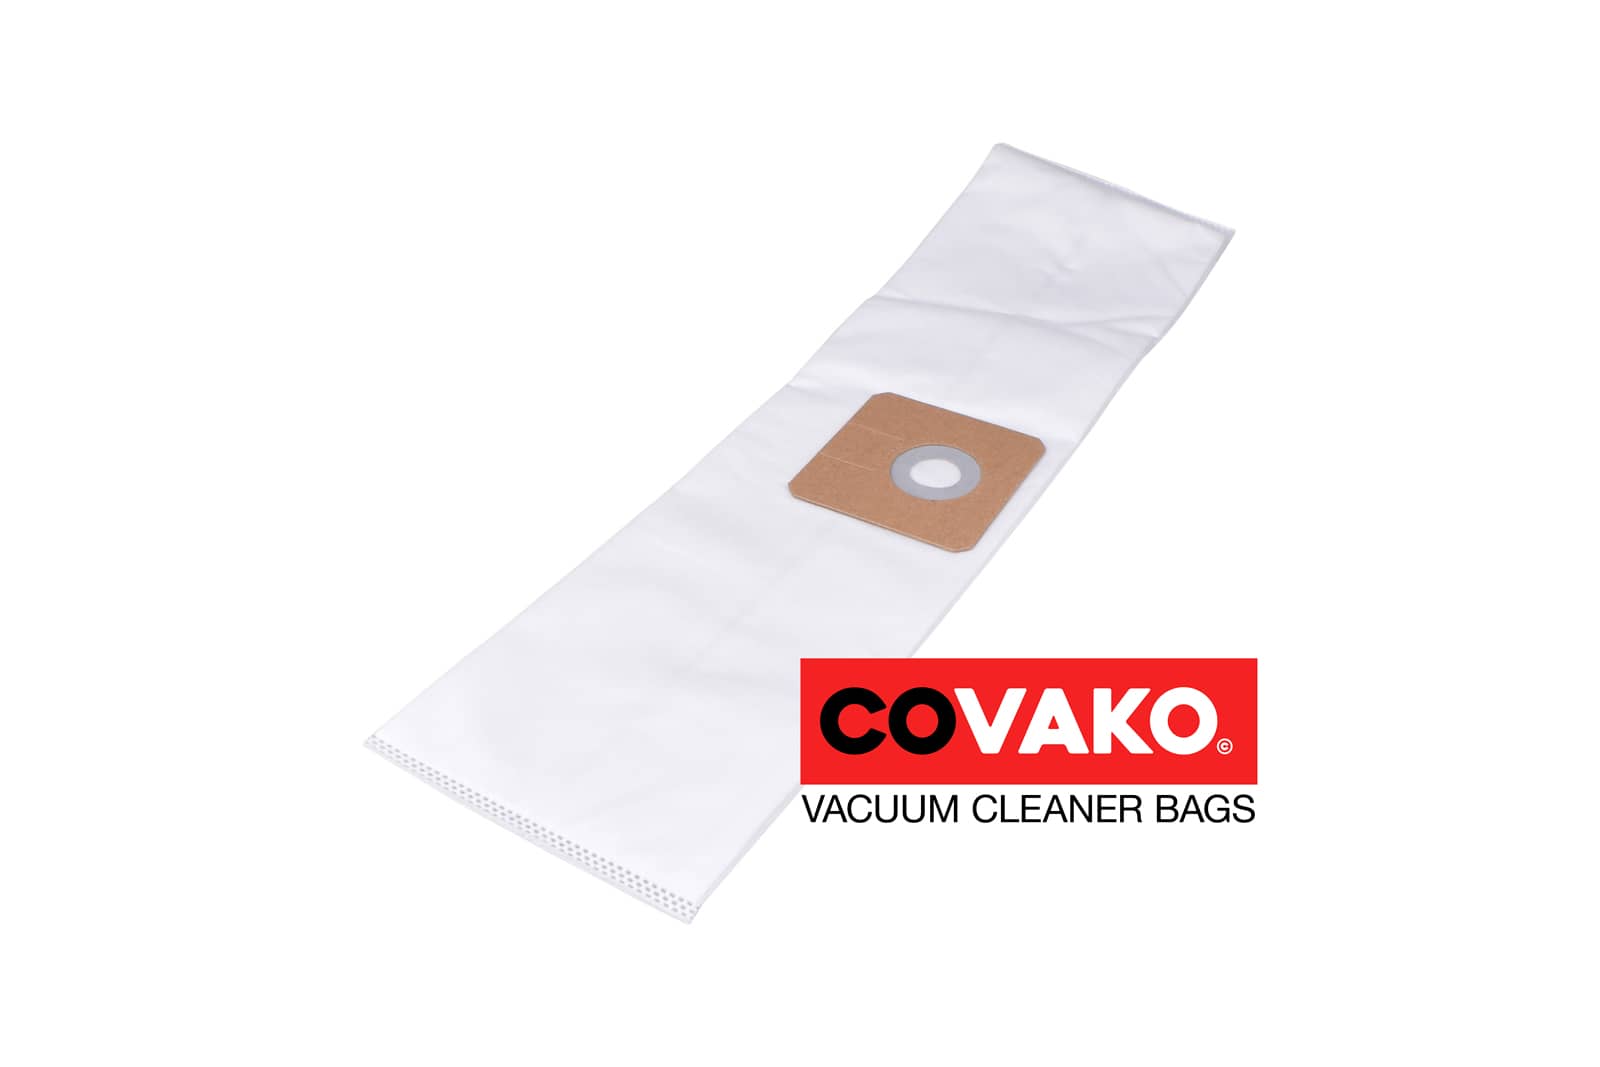 Cleancraft flexCat 112 Q B-Class / Synthesis - Cleancraft vacuum cleaner bags